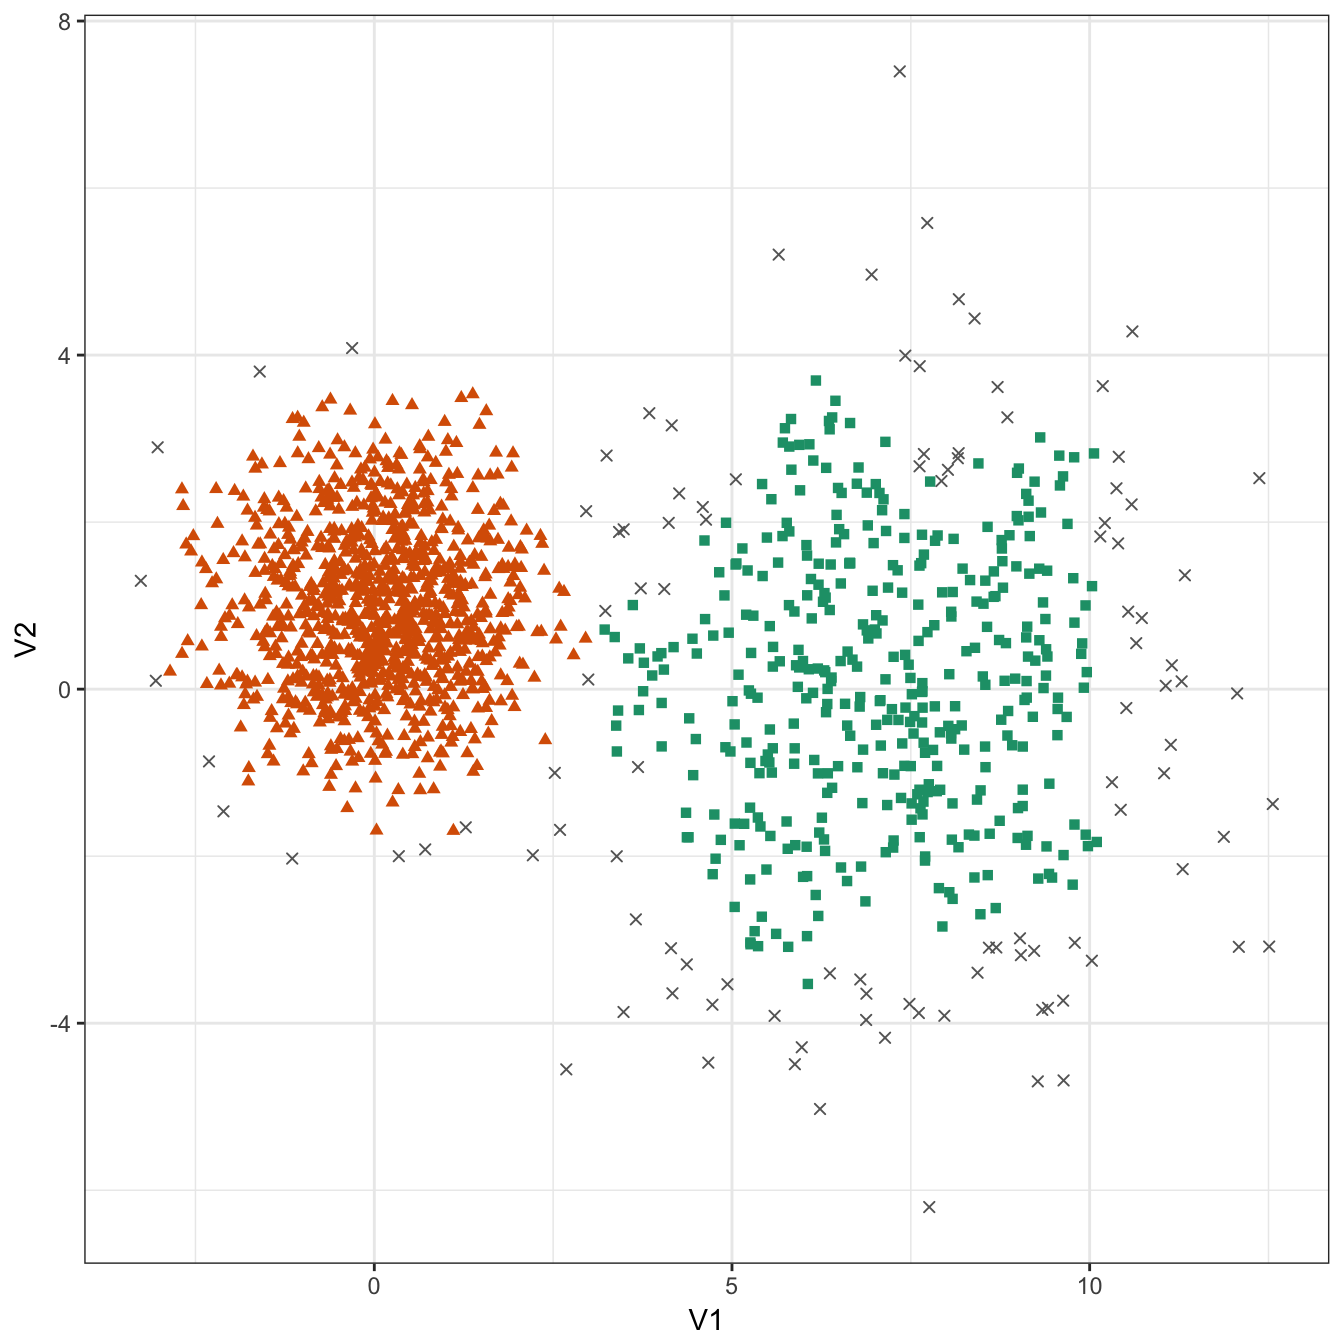 DBSCAN clustering of the different density distribution data set with eps=0.6 and minPts=10. Outlier observations are shown as grey crosses.